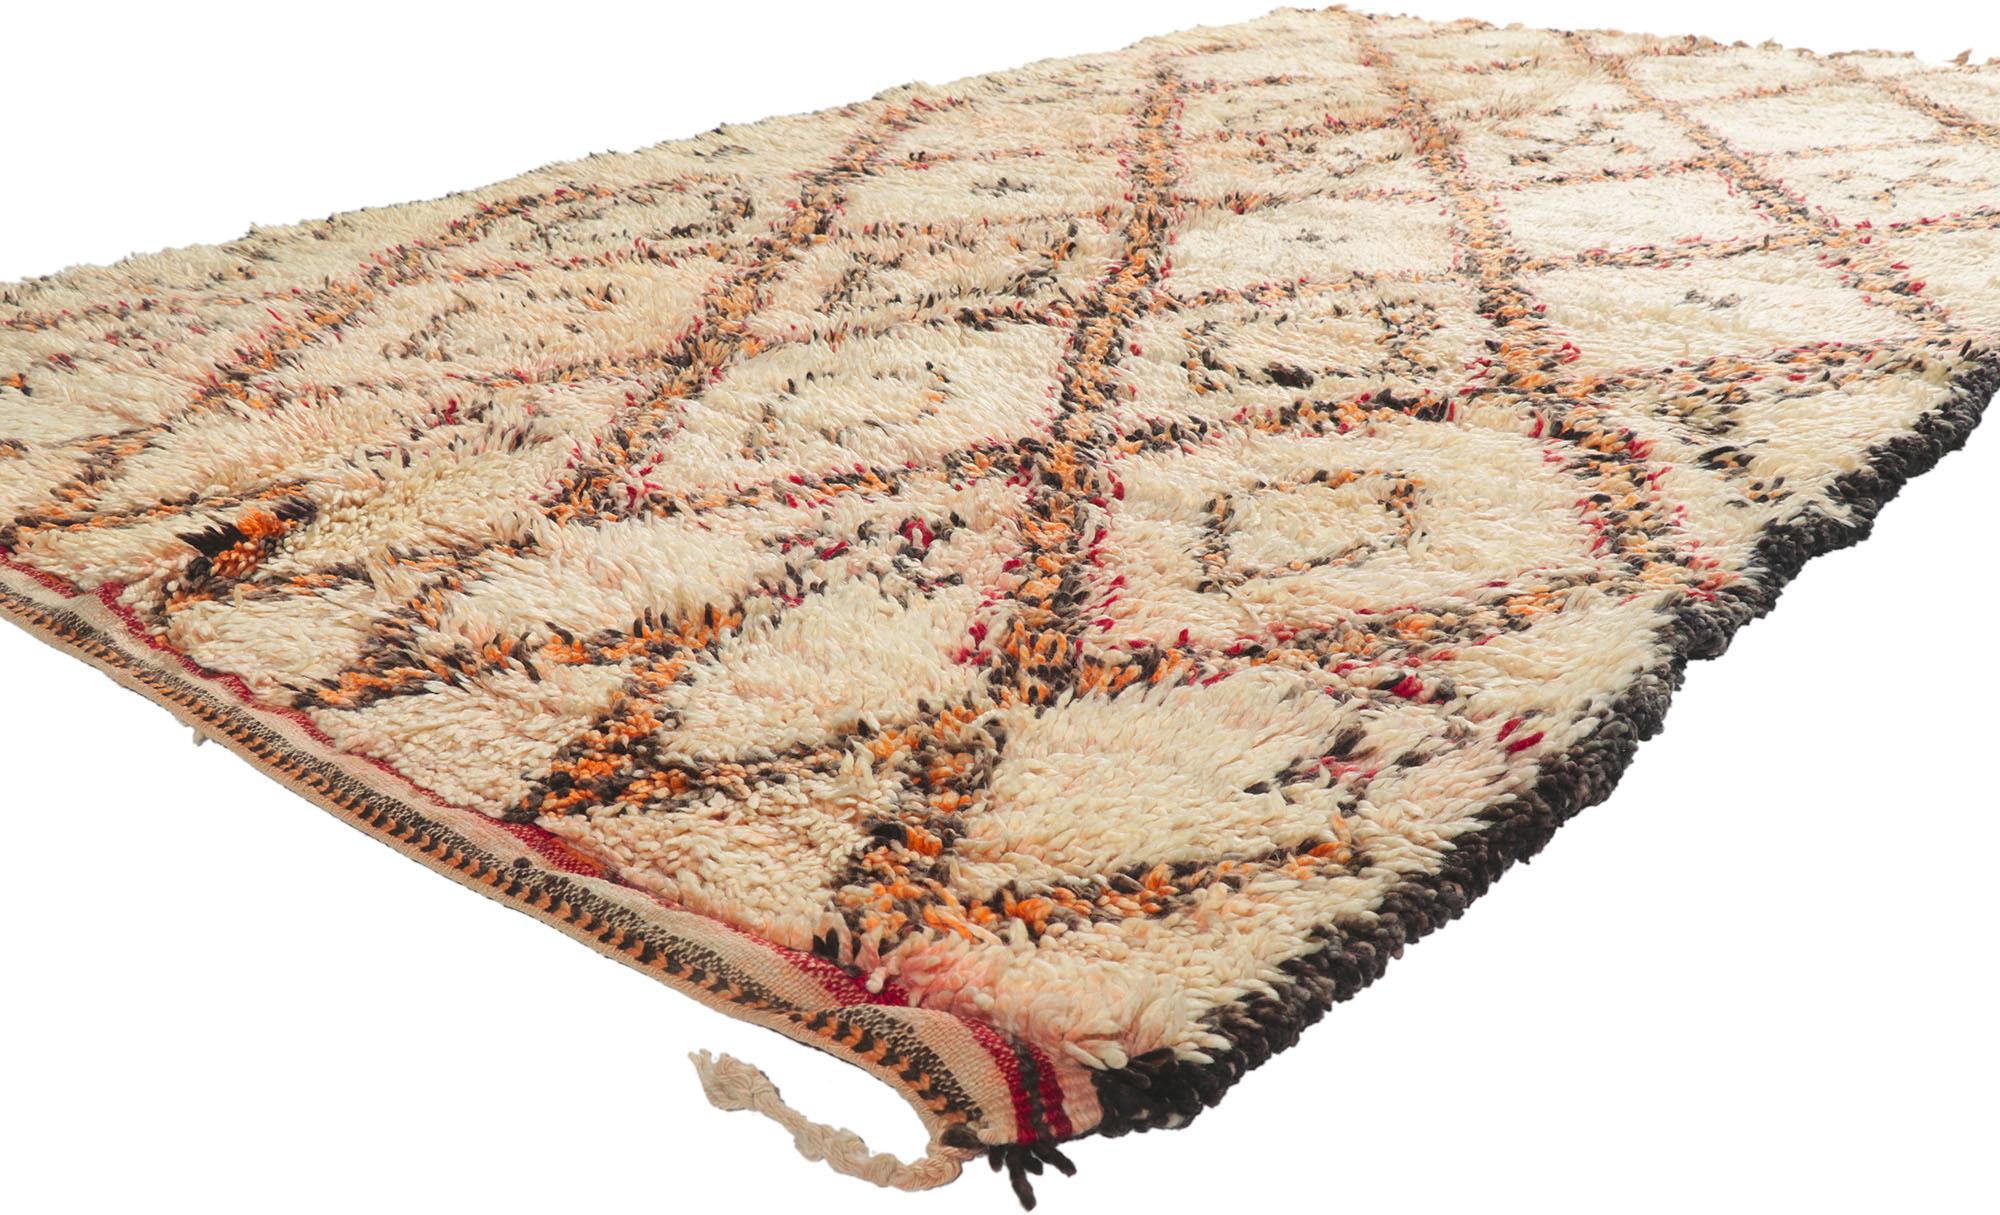 21417 Vintage Berber Moroccan Beni Ourain Rug 06'01 x 10'08. With its simplicity, plush pile and tribal style, this hand knotted wool vintage Berber Beni Ourain Moroccan rug is a captivating vision of woven beauty. It features a diamond lattice